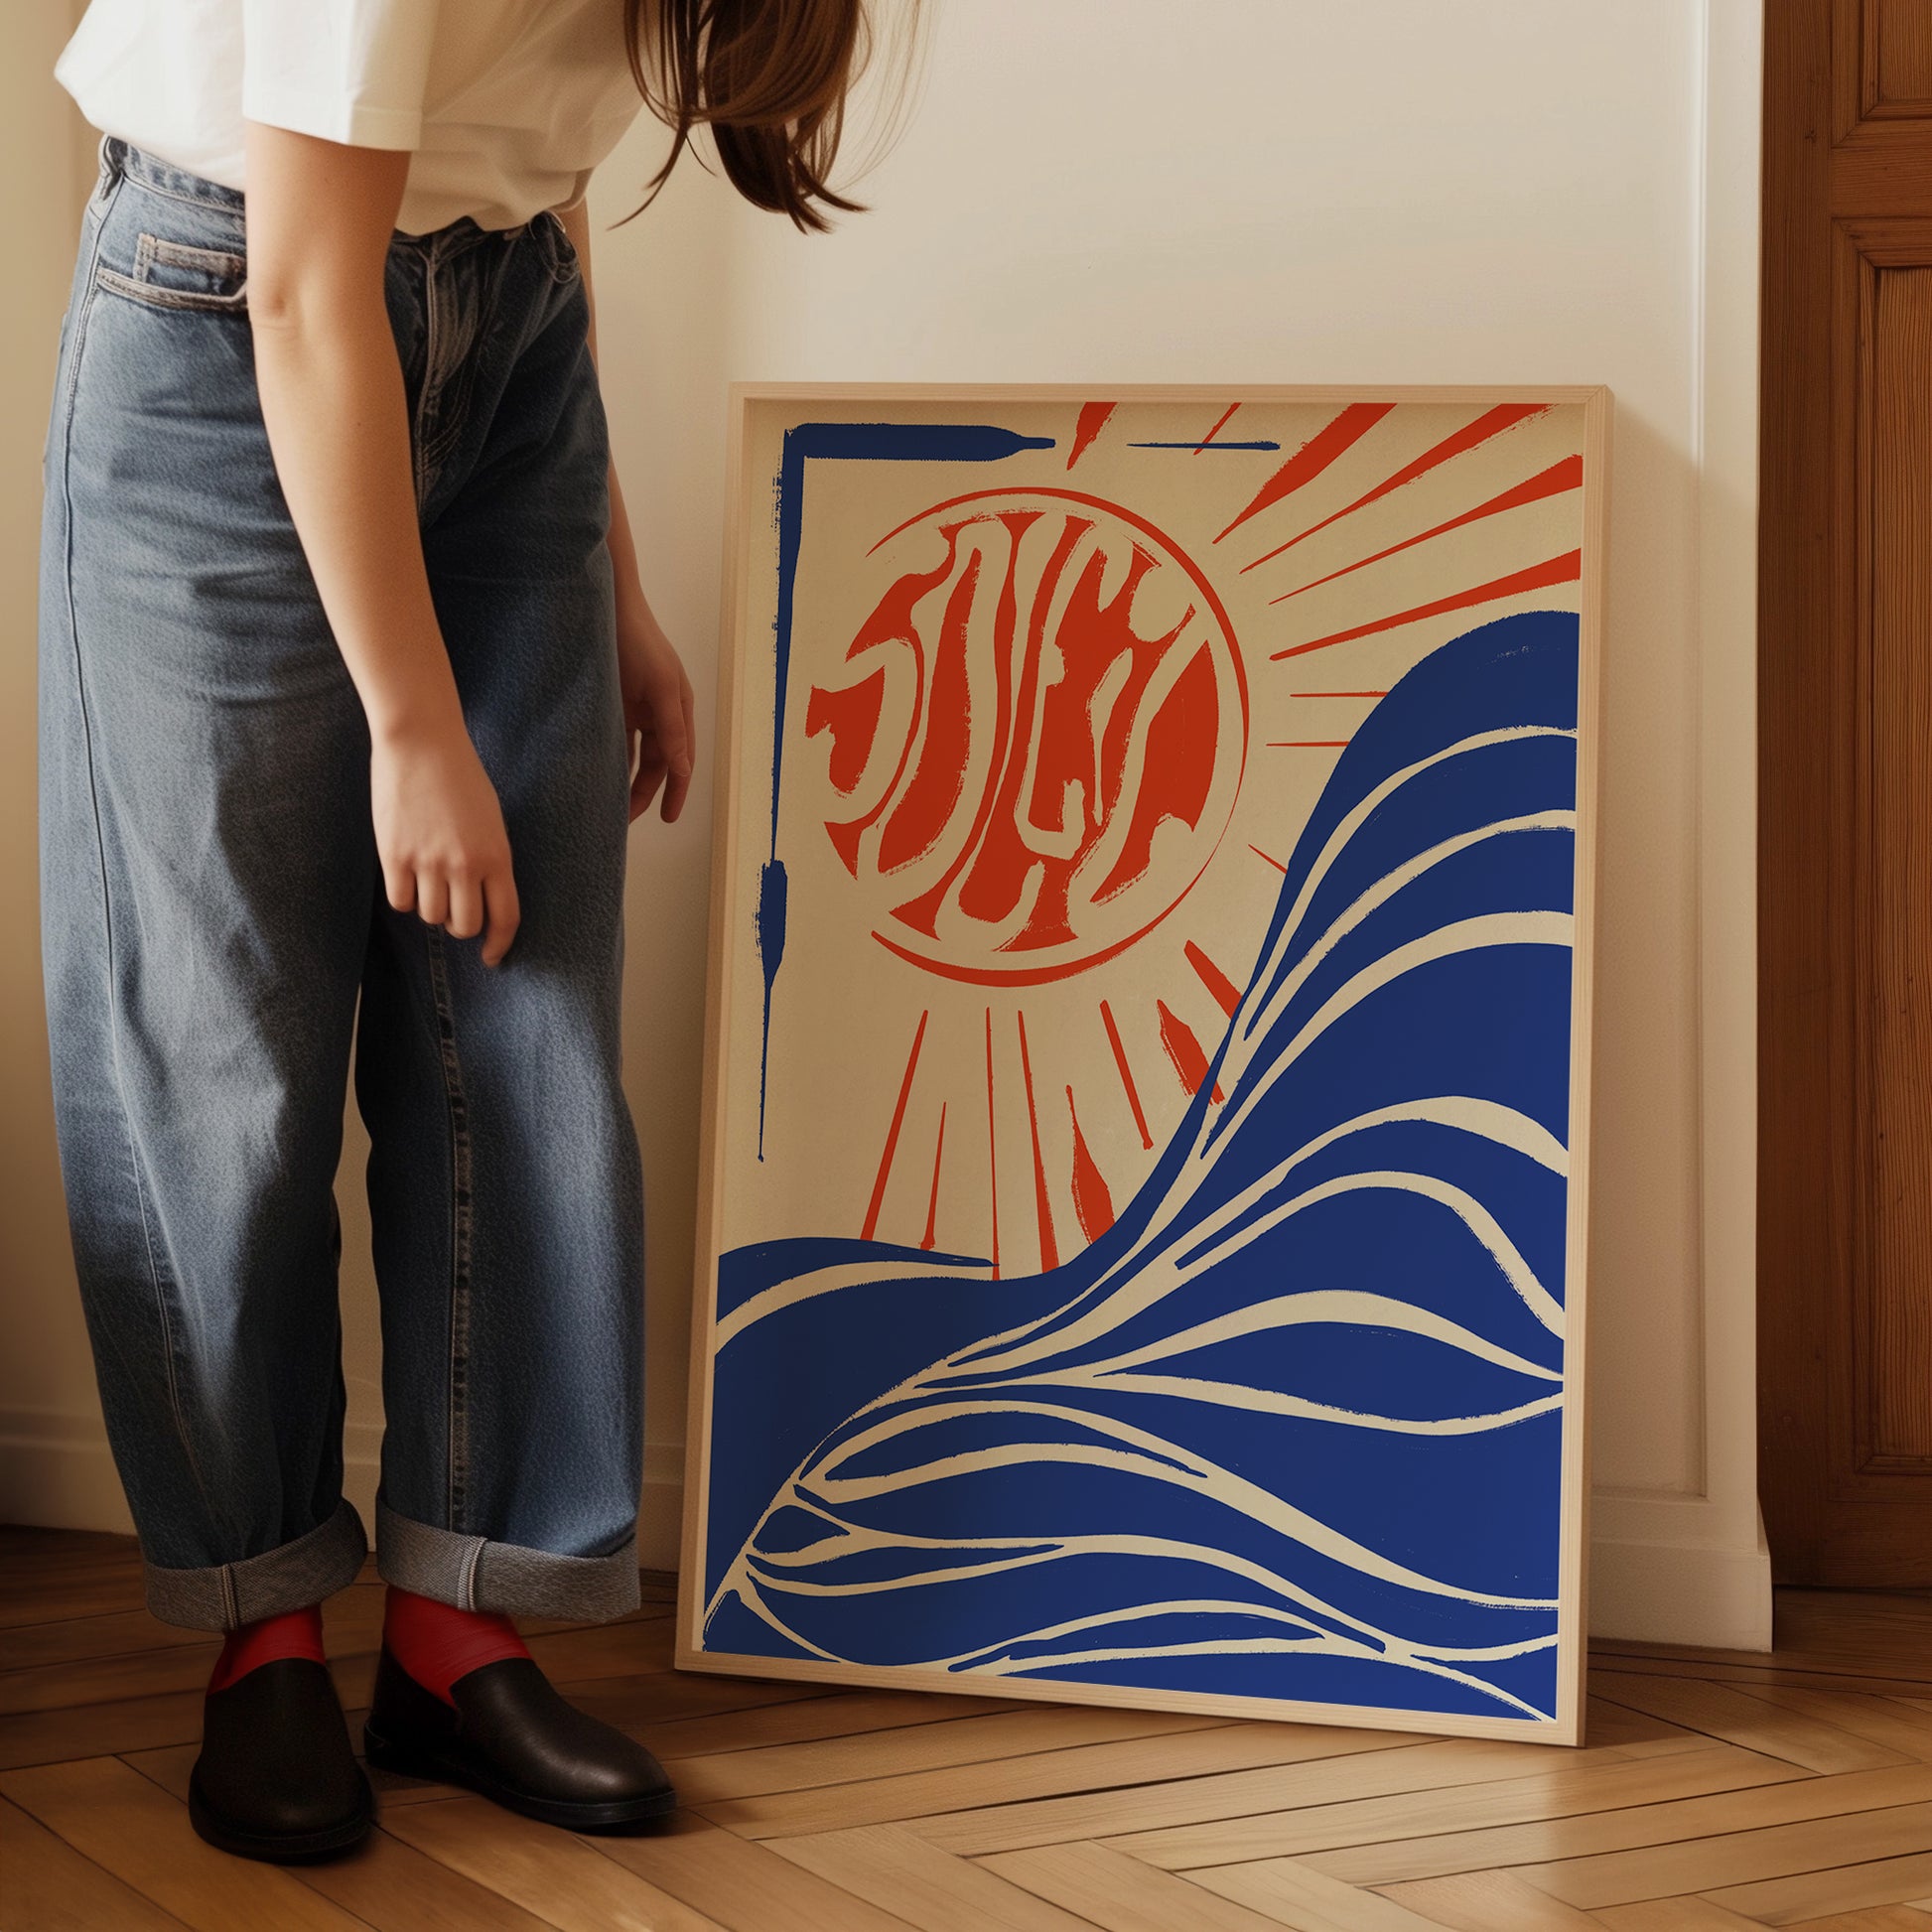 a woman standing next to a painting on a wooden floor